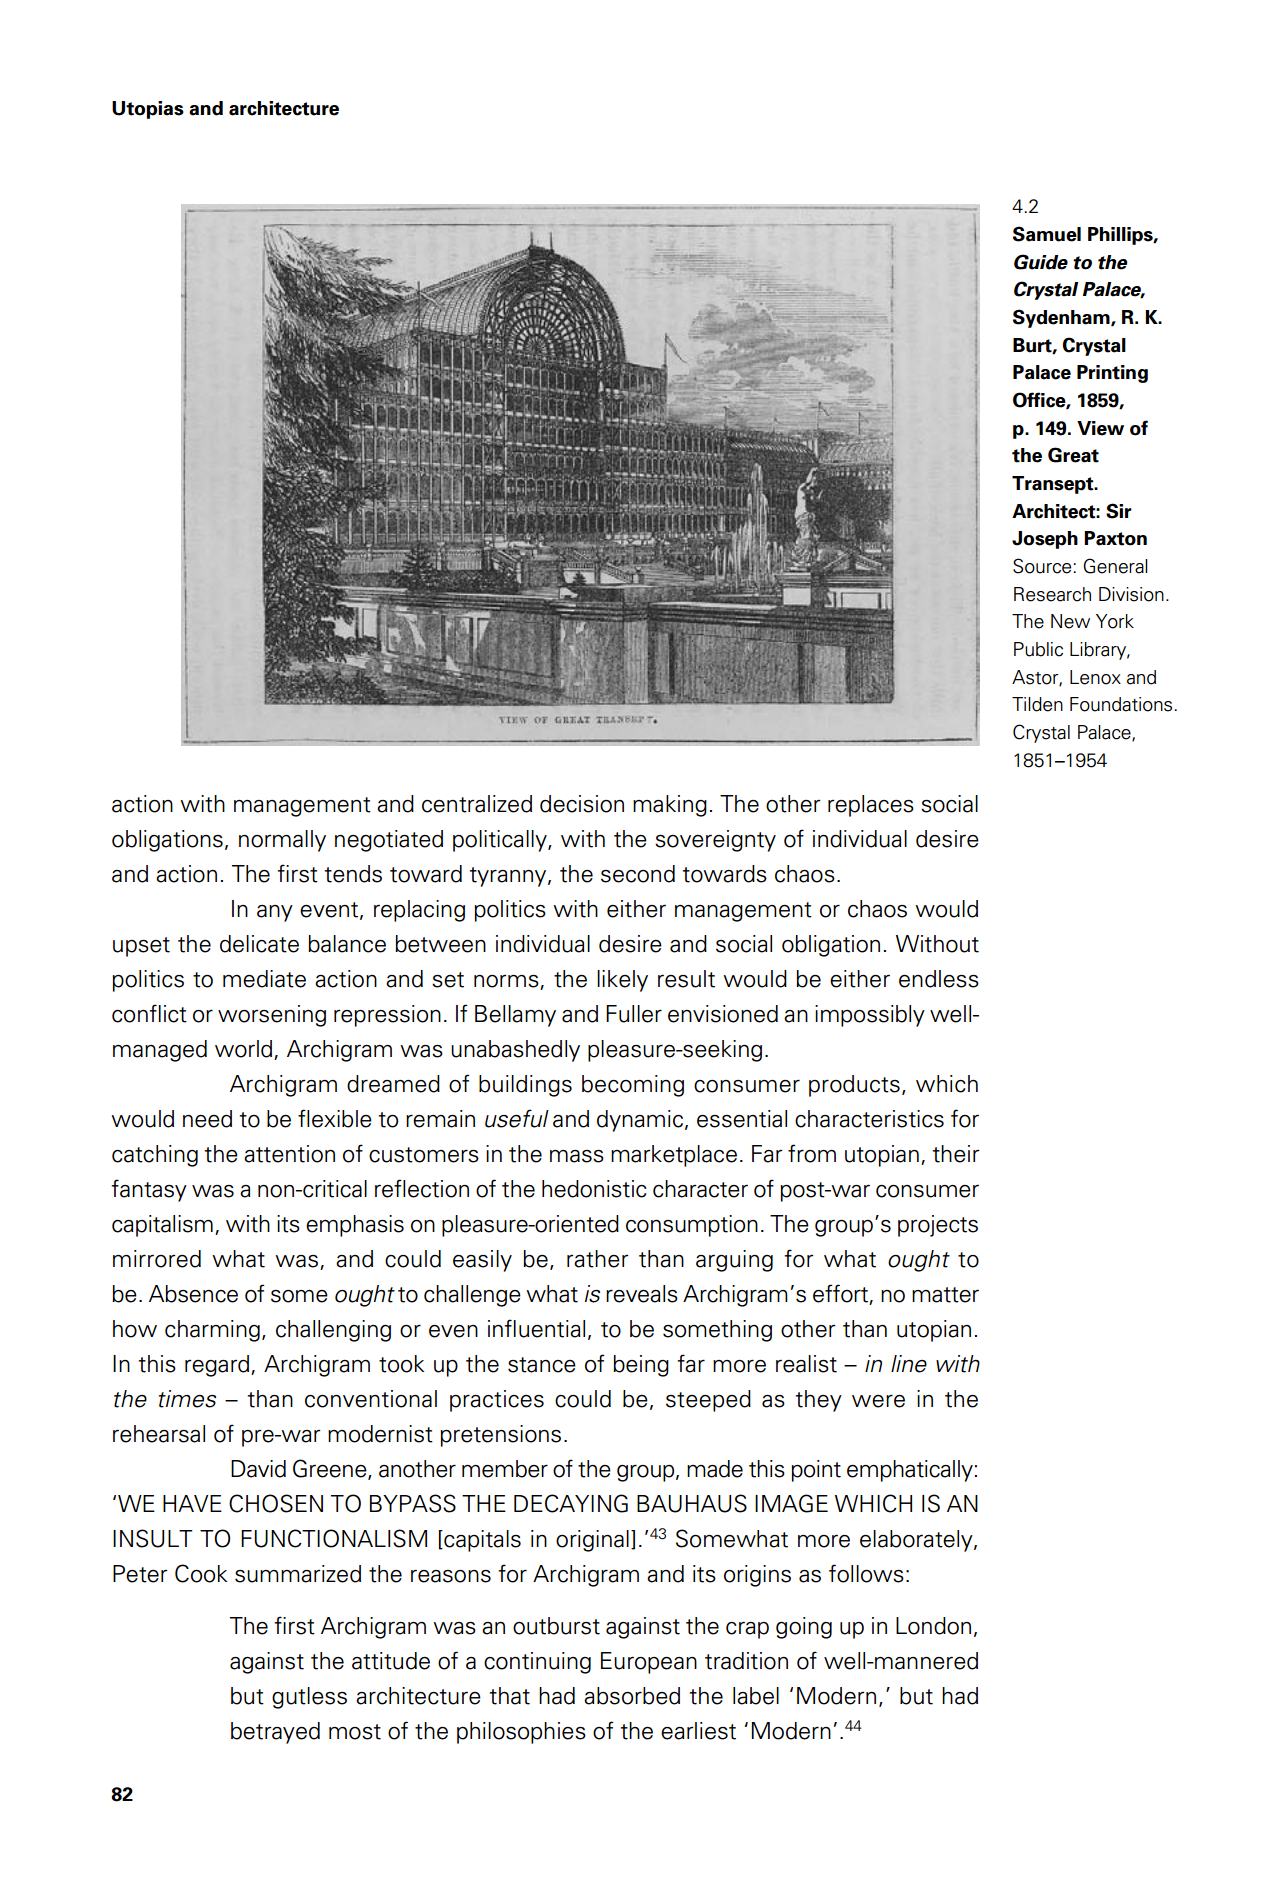 Utopias and Architecture / Nathaniel Coleman. — London ; New York : Routledge, 2005